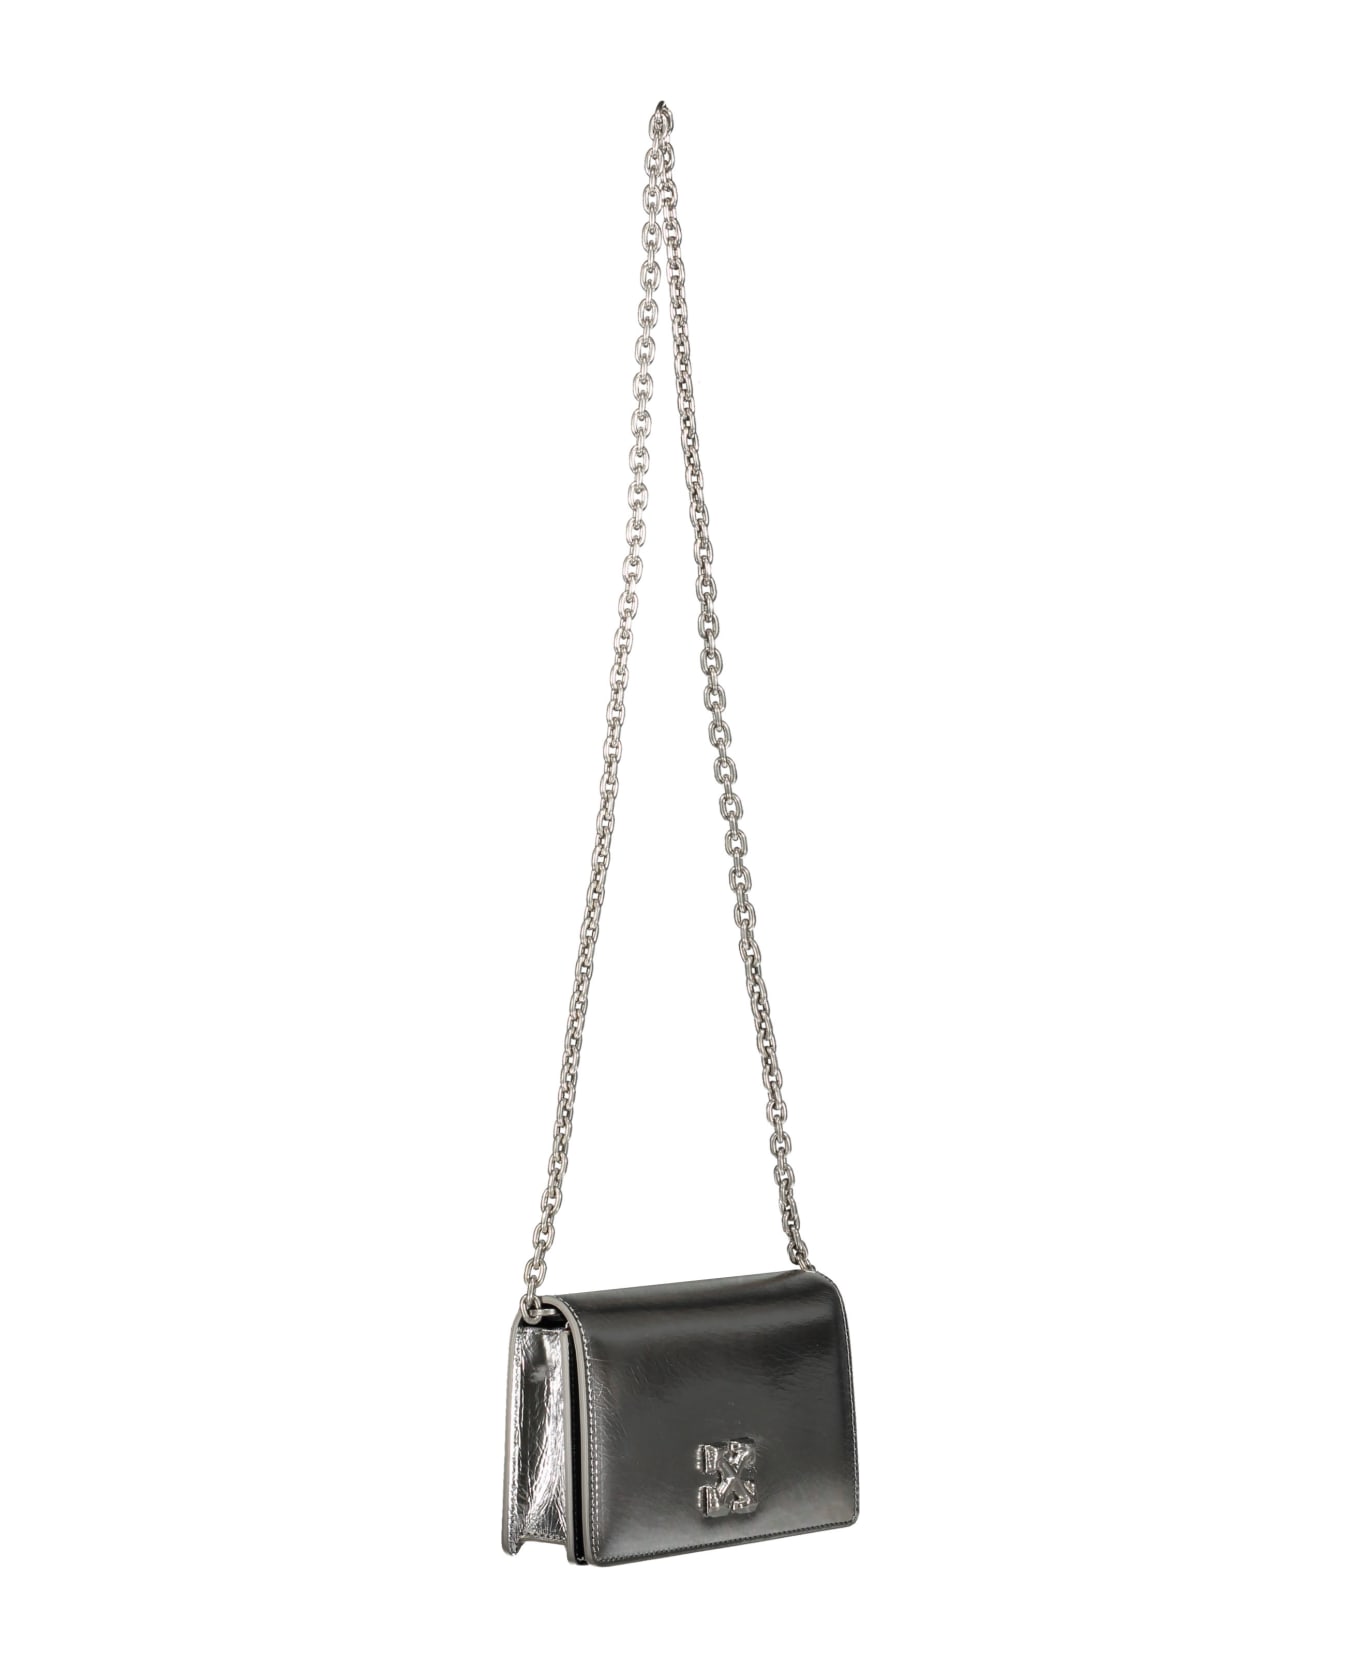 Off-White Jitney Leather Crossbody Bag - silver